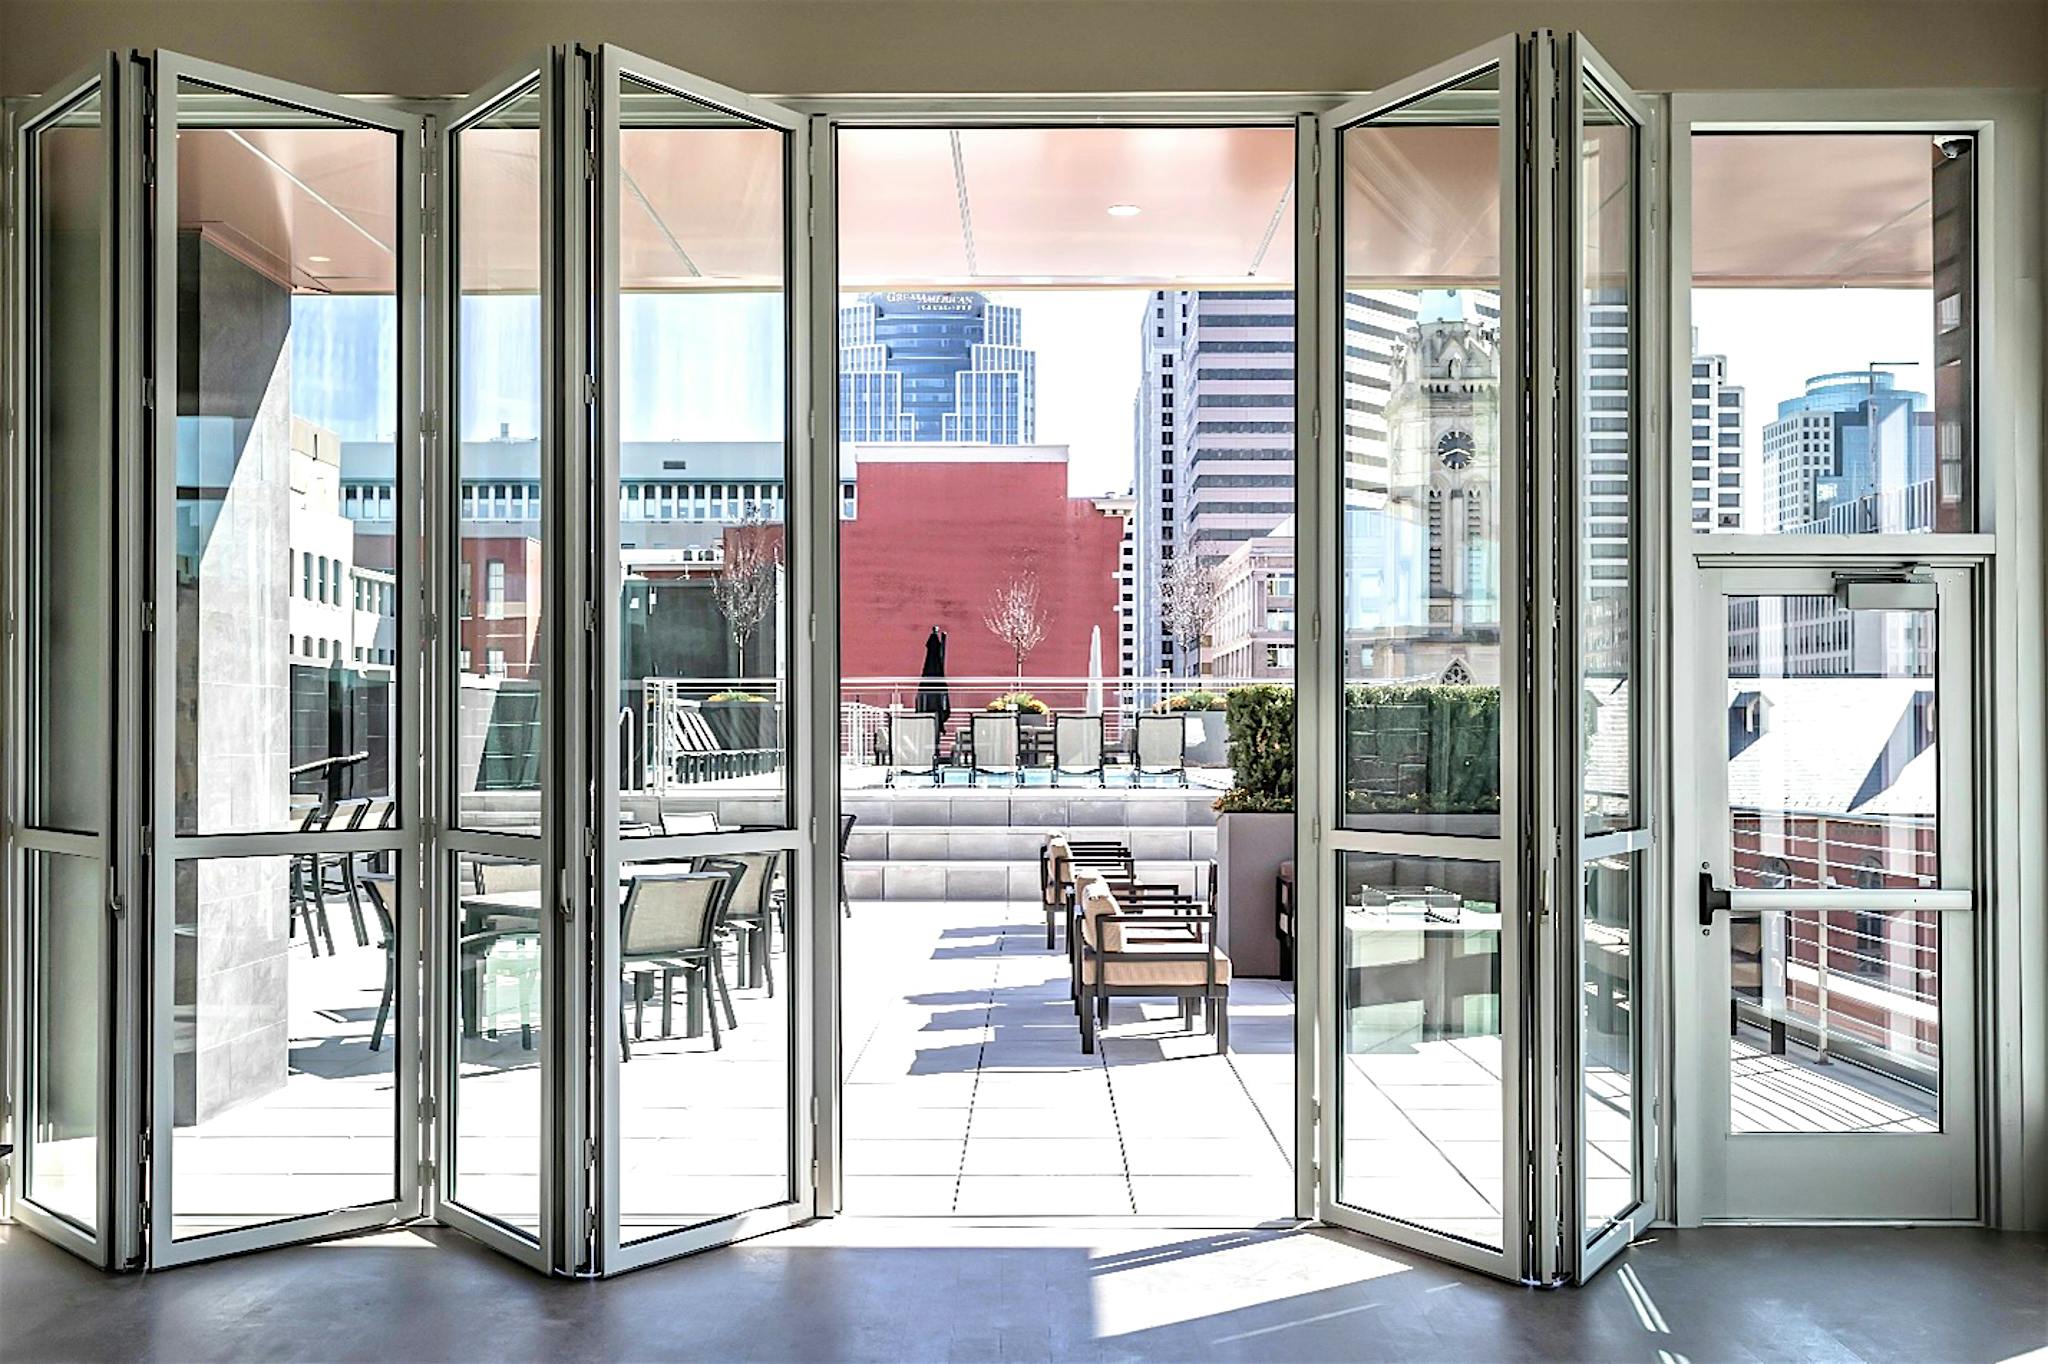 exterior moveable glass wall systems in multifamily rooftop application